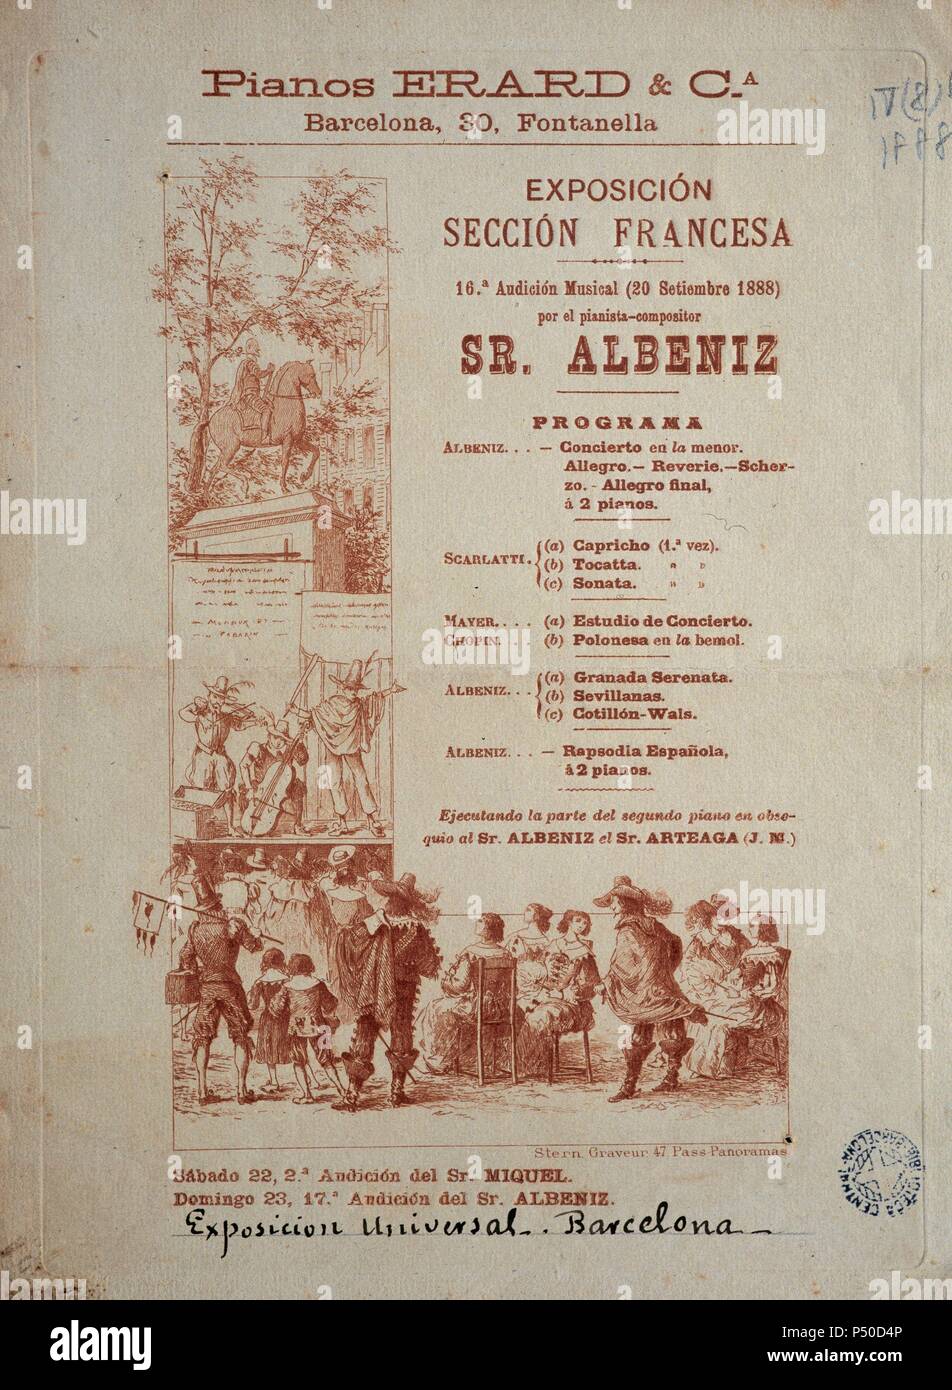 Isaac Albeniz (1860-1909). Composer and Spanish pianist. Concert programme for September 20, 1888 in Barcelona, during the Universal Exhibition (French Section). Catalonia, Spain. Stock Photo